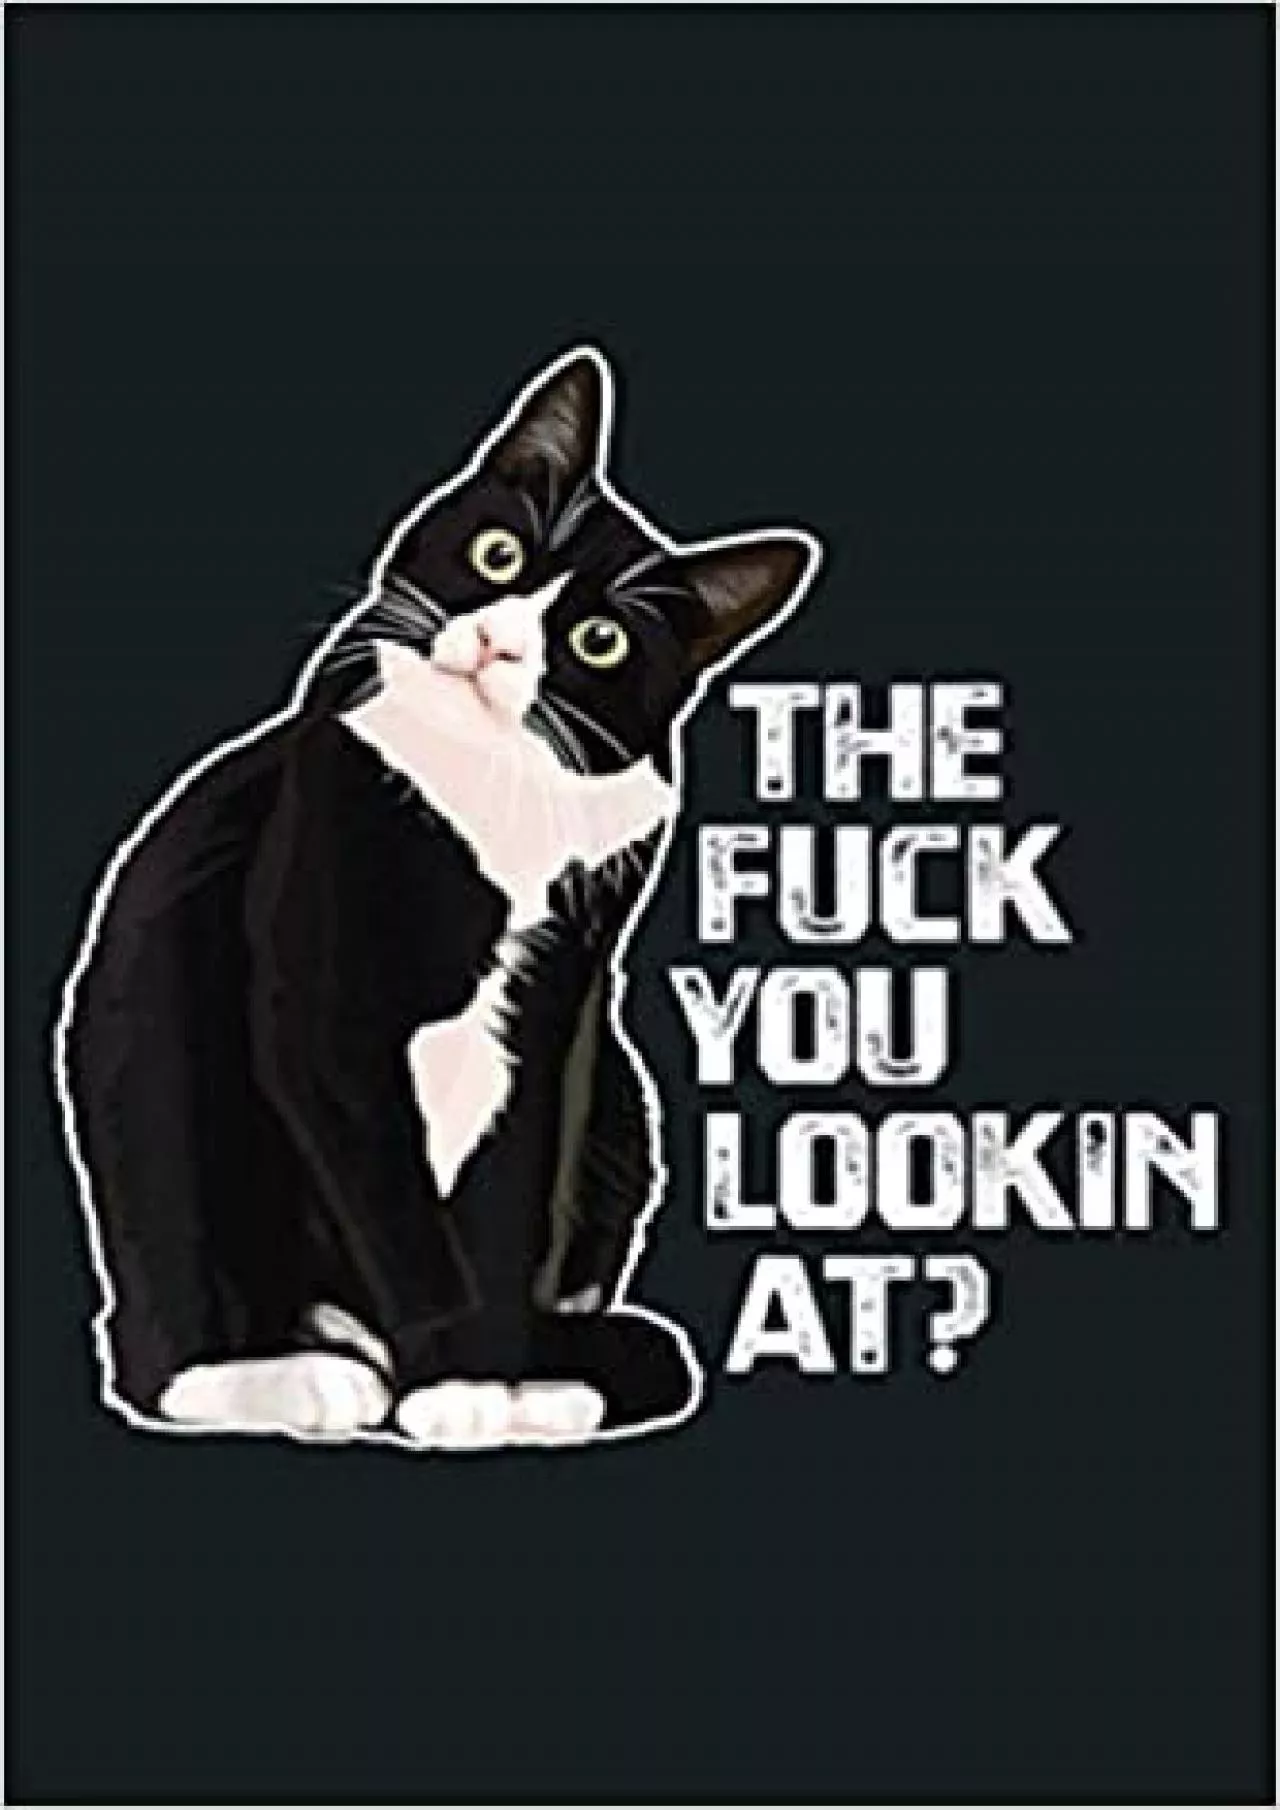 The Fuck You Lookin At Funny Vulgar Novelty For Cat Lovers: Notebook Planner - 6x9 inch